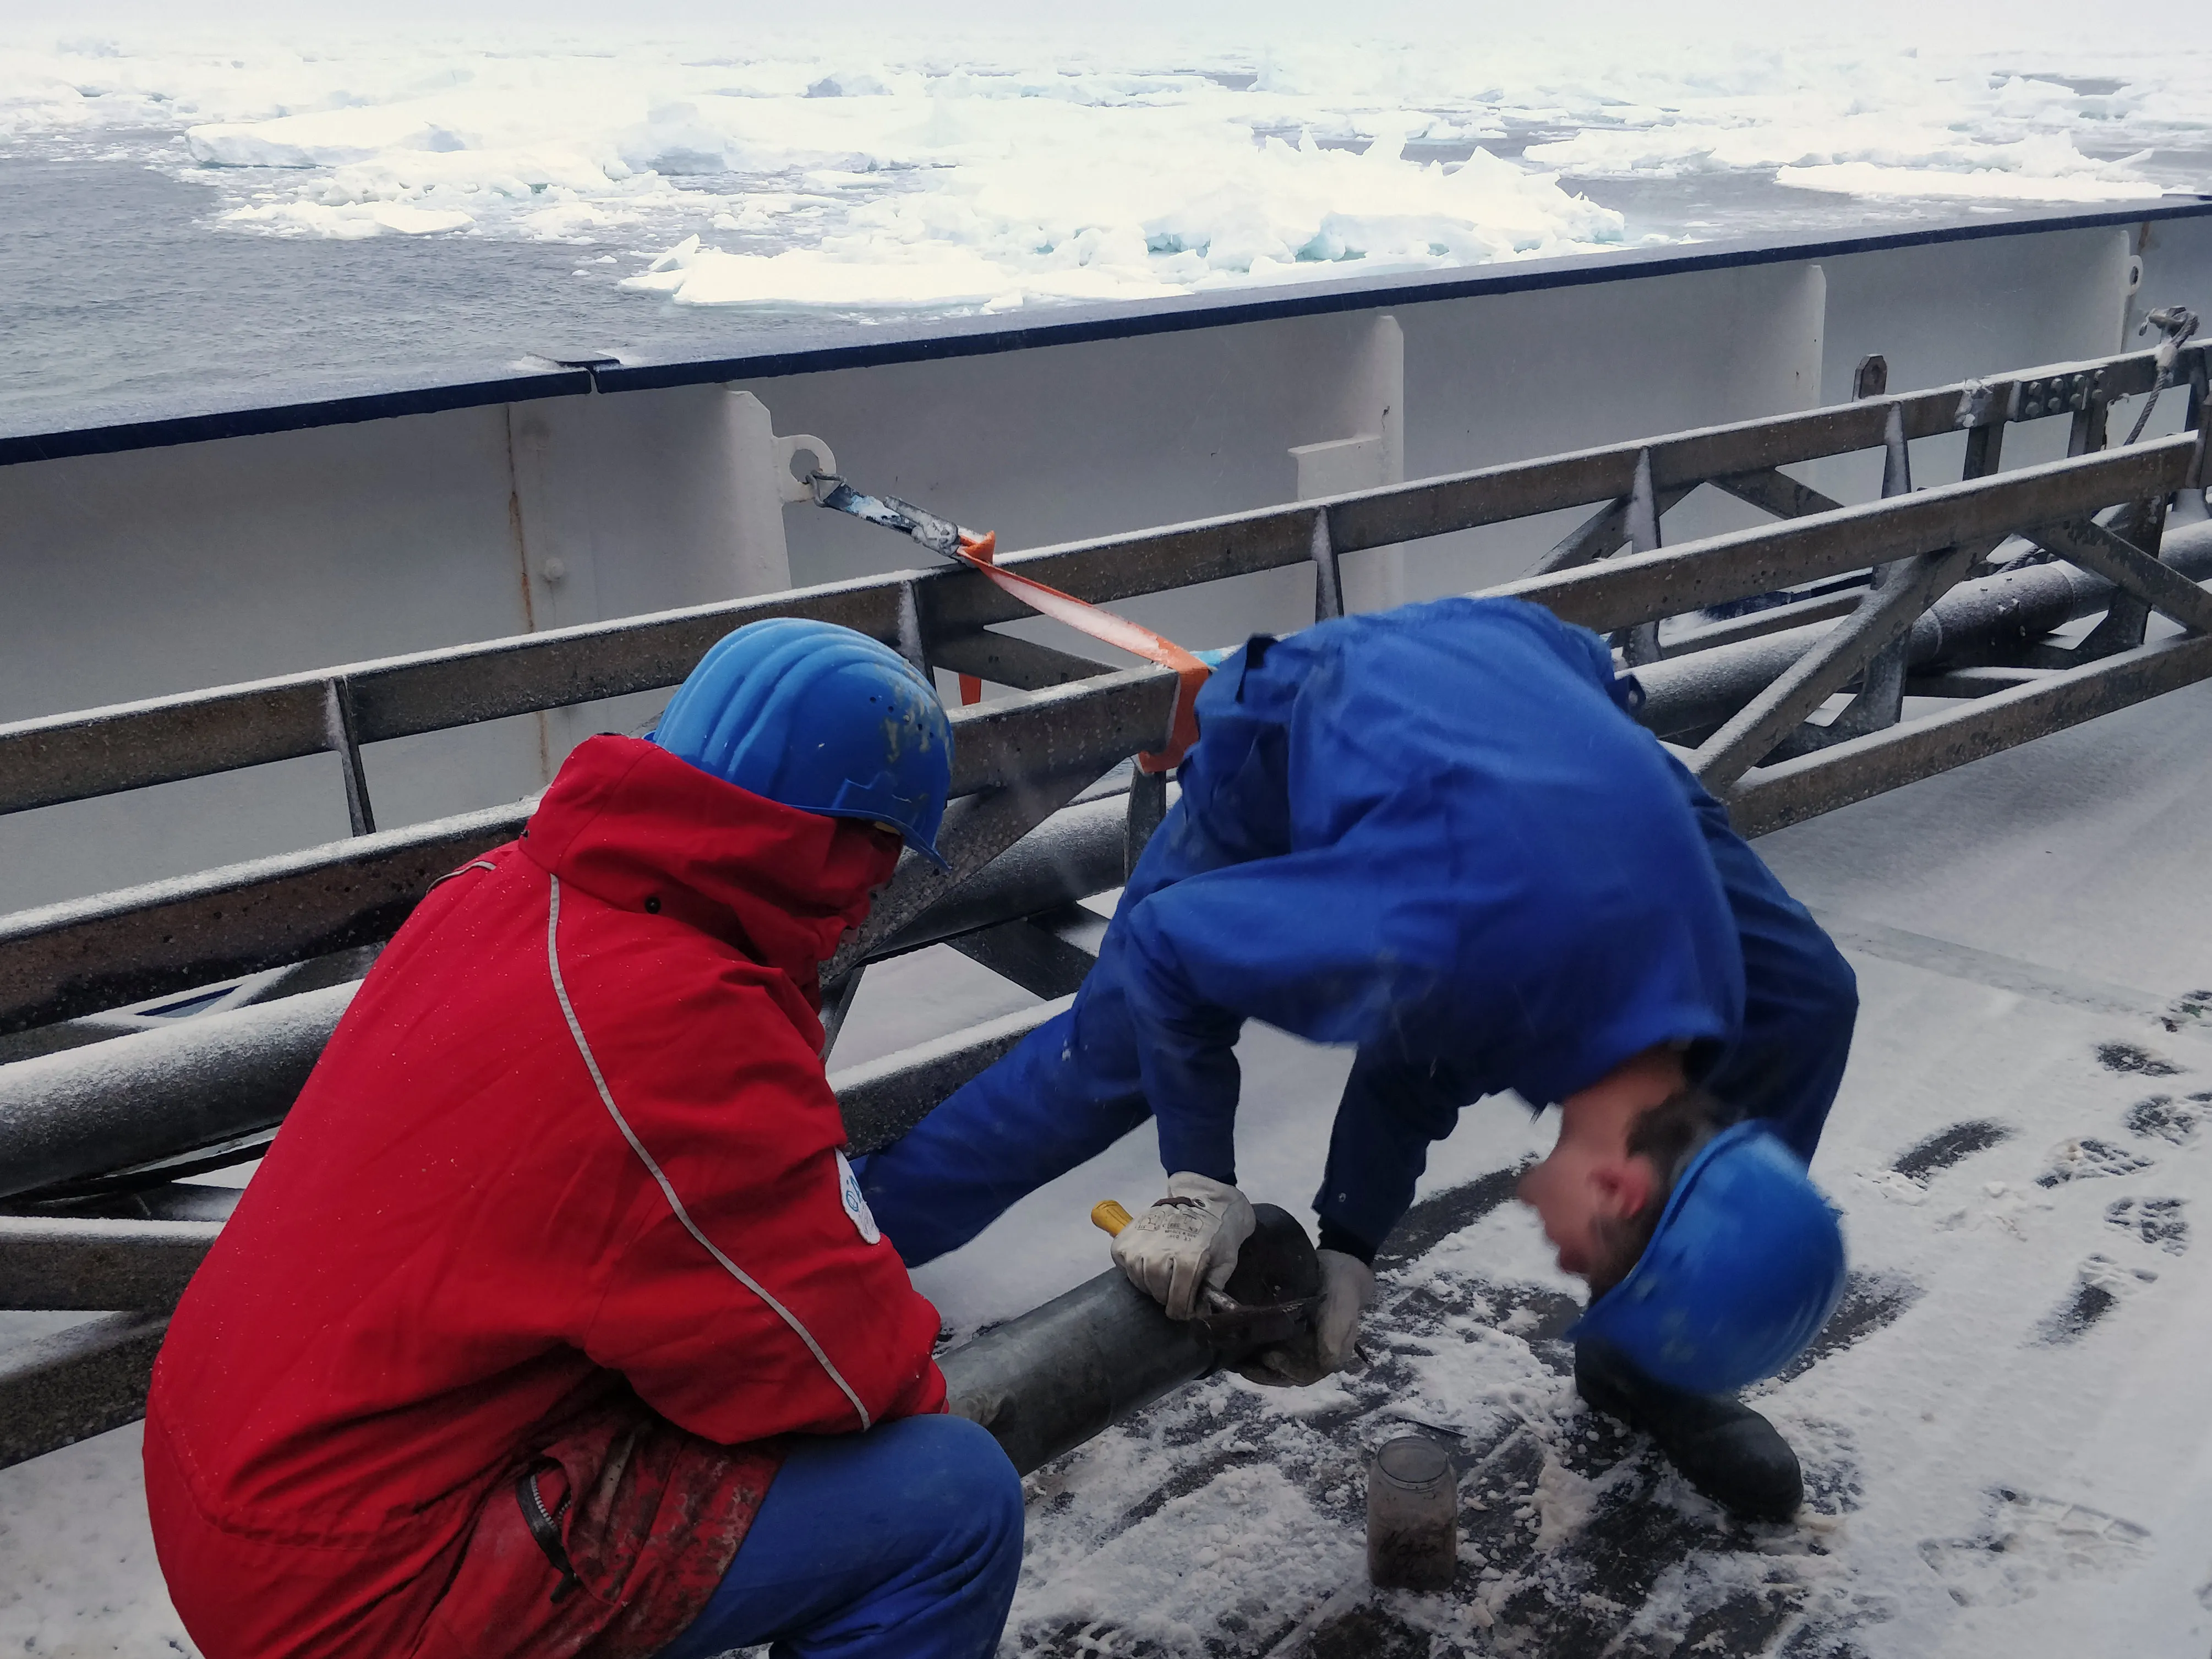 Two men working with what looks like a steel pipe on a snowy ship's deck, with sea ice in the background.